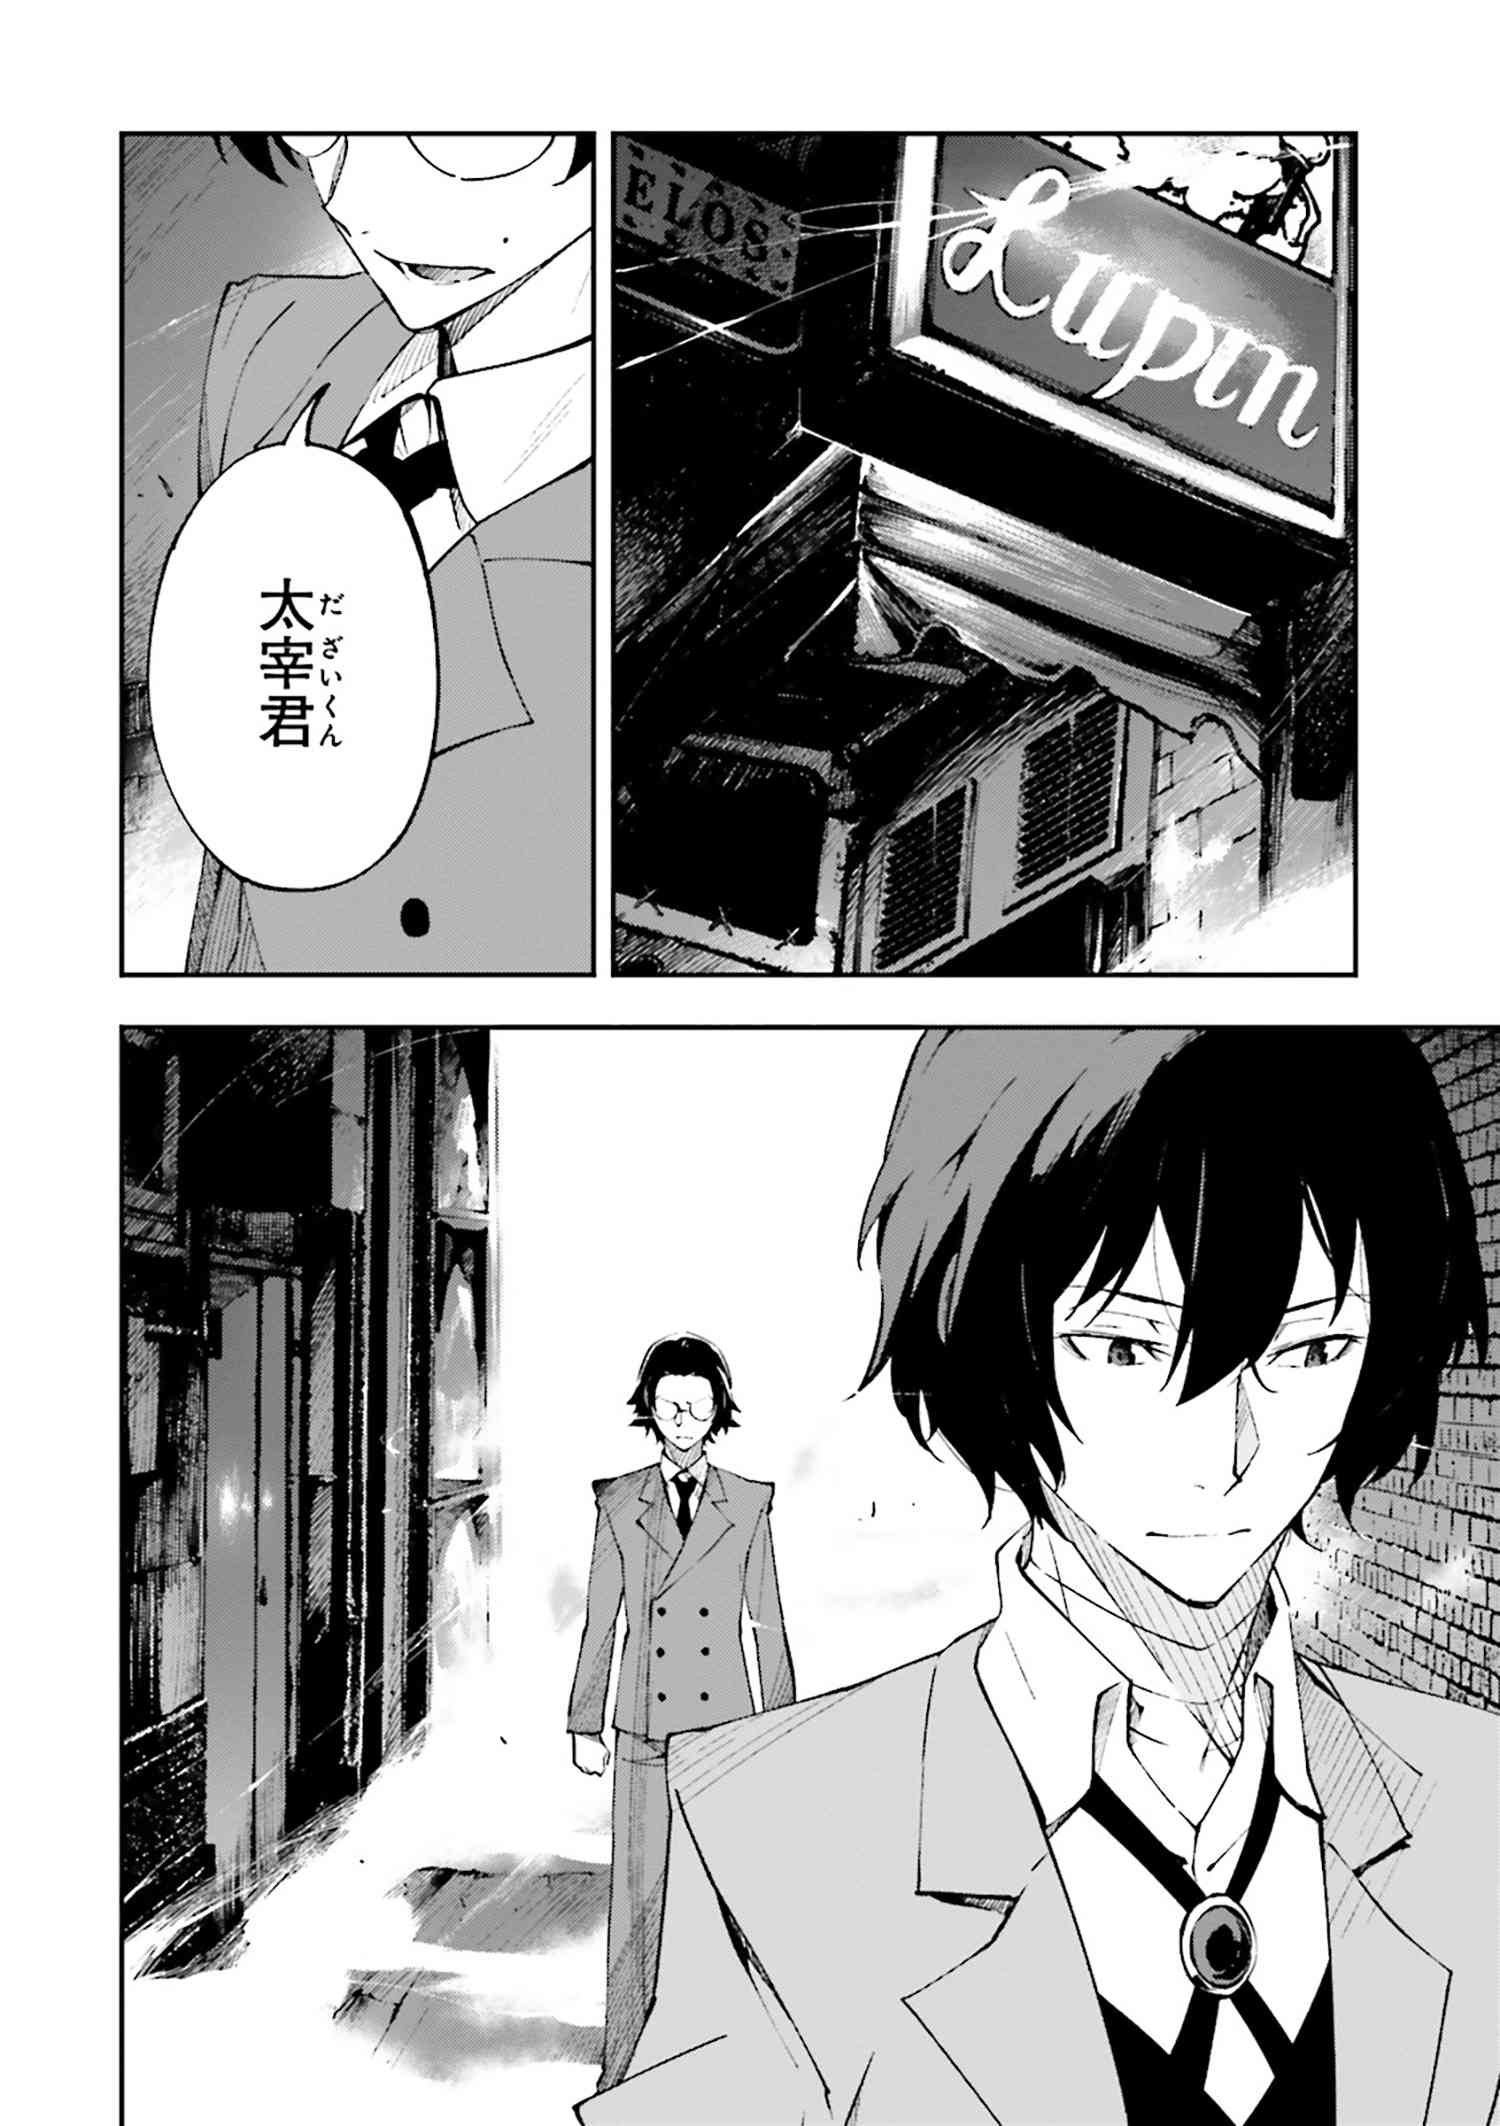 Bungou Stray Dogs: Dead Apple - Chapter 1-2 - Page 21